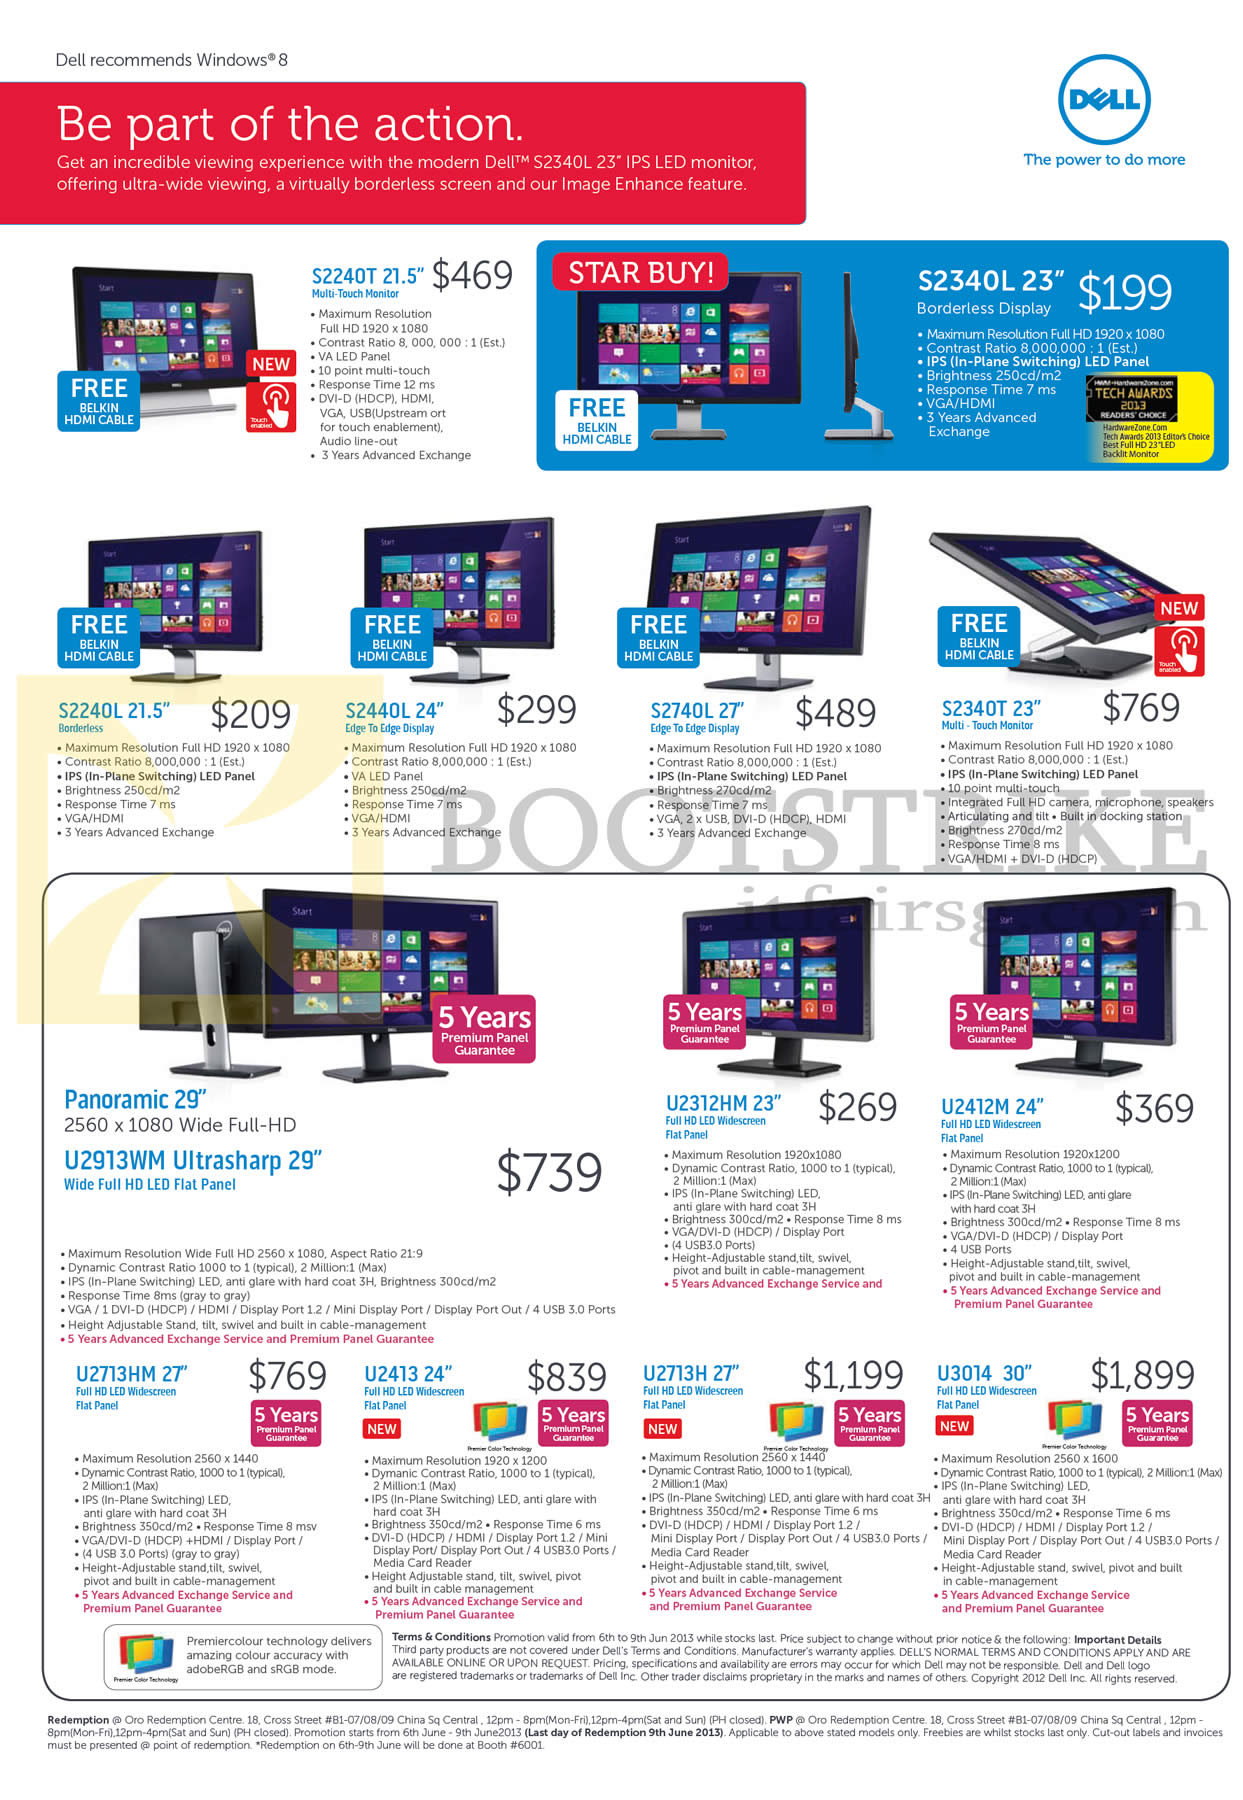 PC SHOW 2013 price list image brochure of Dell Monitors S2240T, S2240L, S2440L, S2740L, S2340T, U2312HM, U2412M, U2713HM, U2413, U2713H, U3014